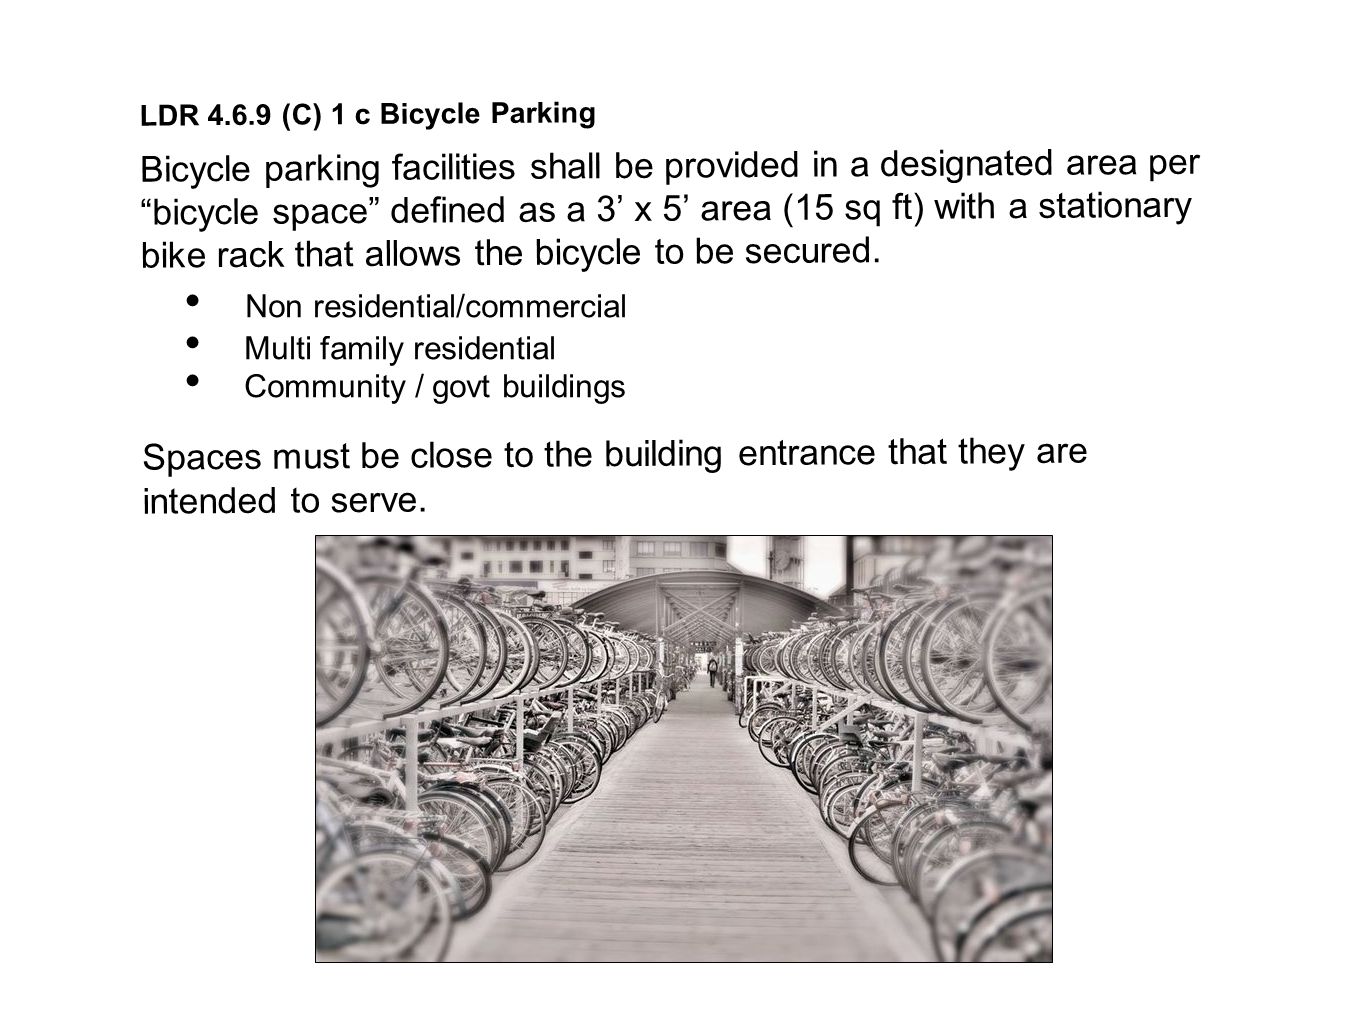 LDR (C) 1 c Bicycle Parking Bicycle parking facilities shall be provided in a designated area per bicycle space defined as a 3’ x 5’ area (15 sq ft) with a stationary bike rack that allows the bicycle to be secured.